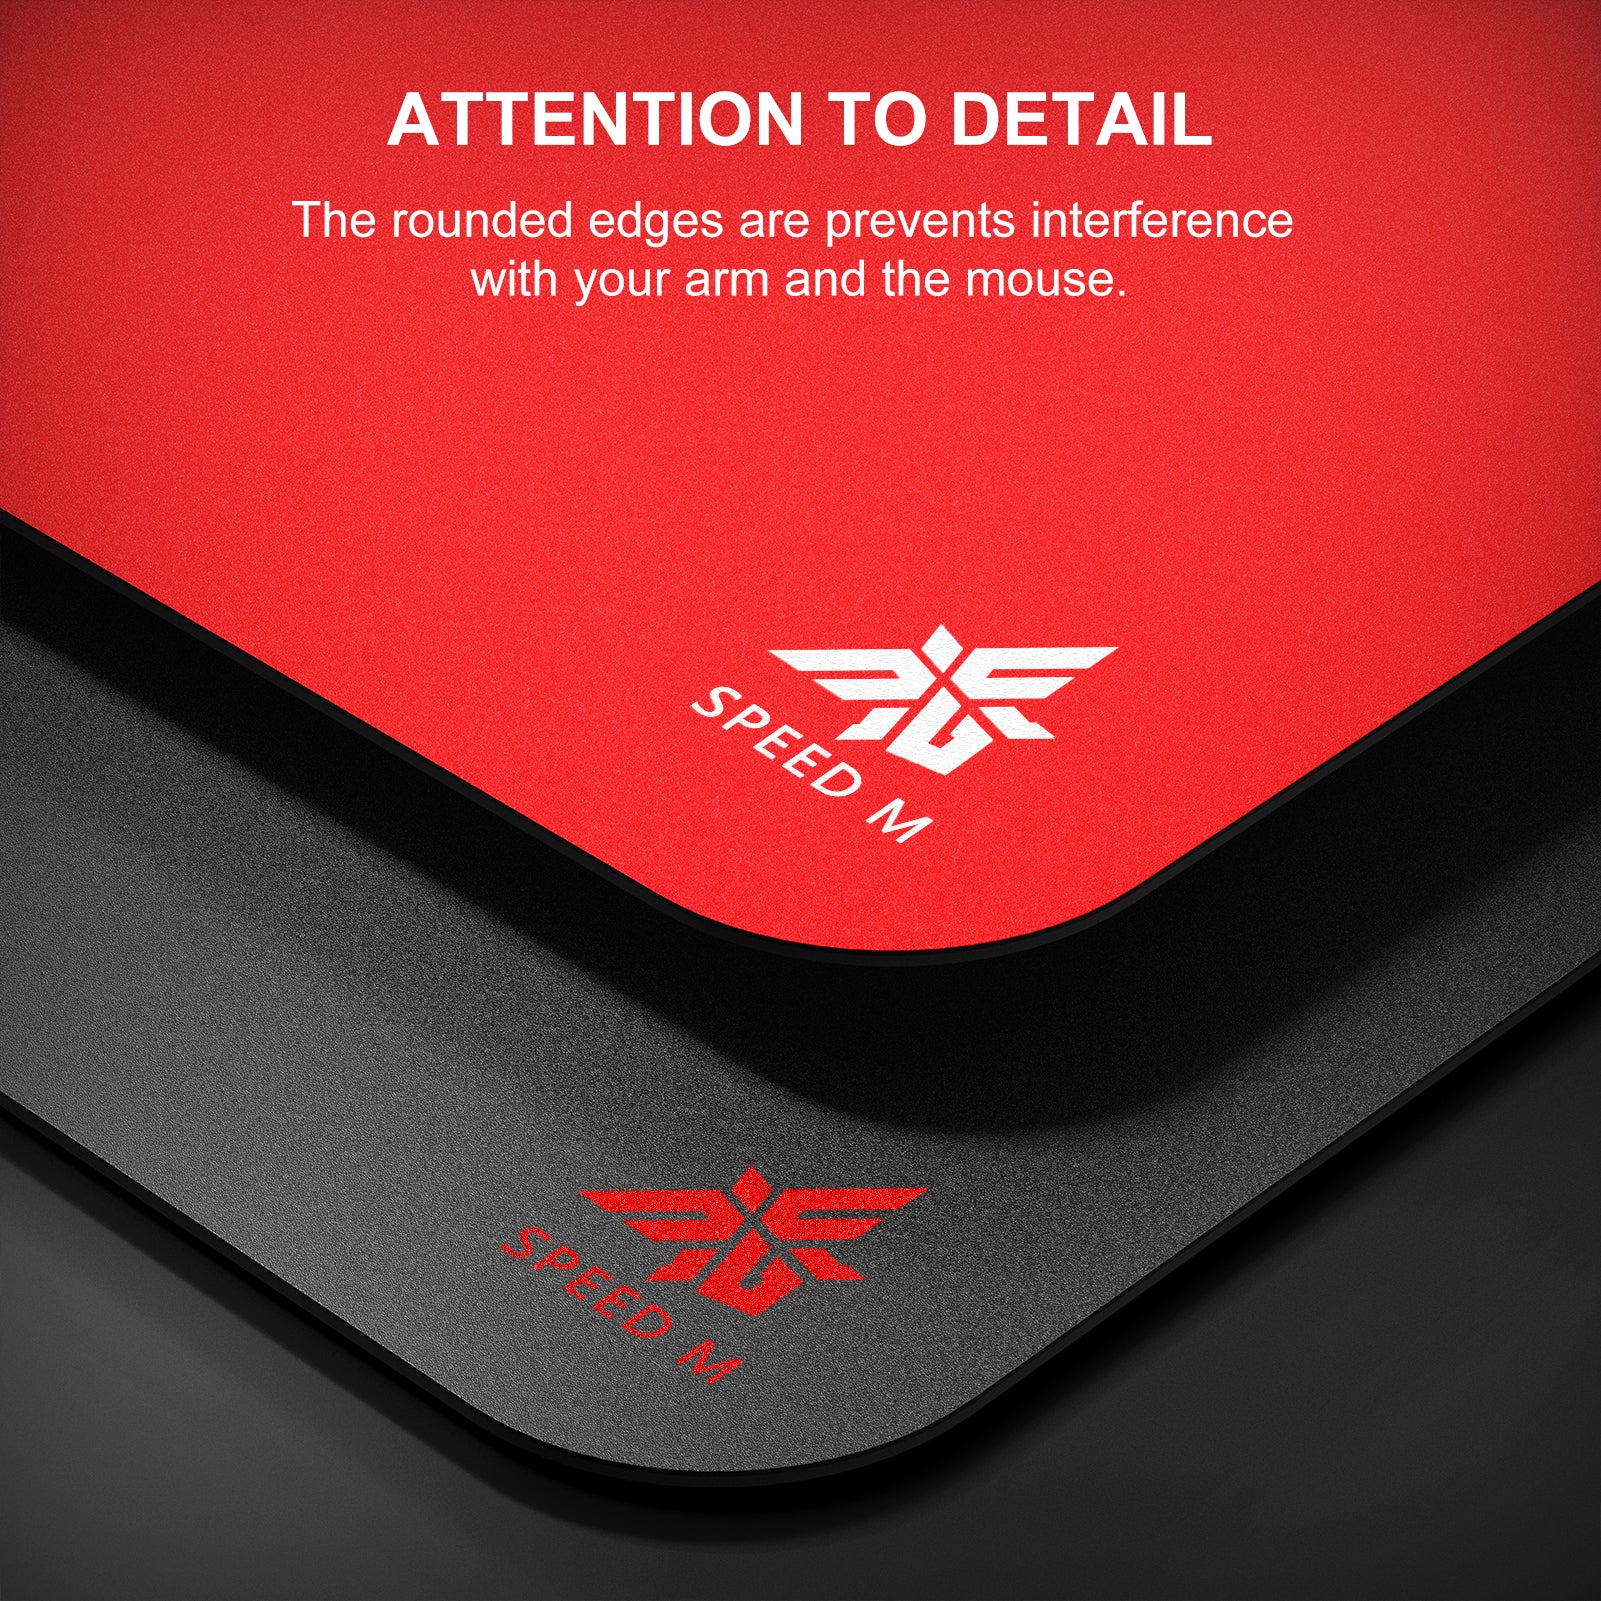 NPET SPEEDM Gaming Mousepad - Resin Surface Hard Gaming Mouse pad,Balanced Control & Speed, No Smell Waterproof Mouse Mat for Esports Gamers [Hard/Fast] RAINDOW